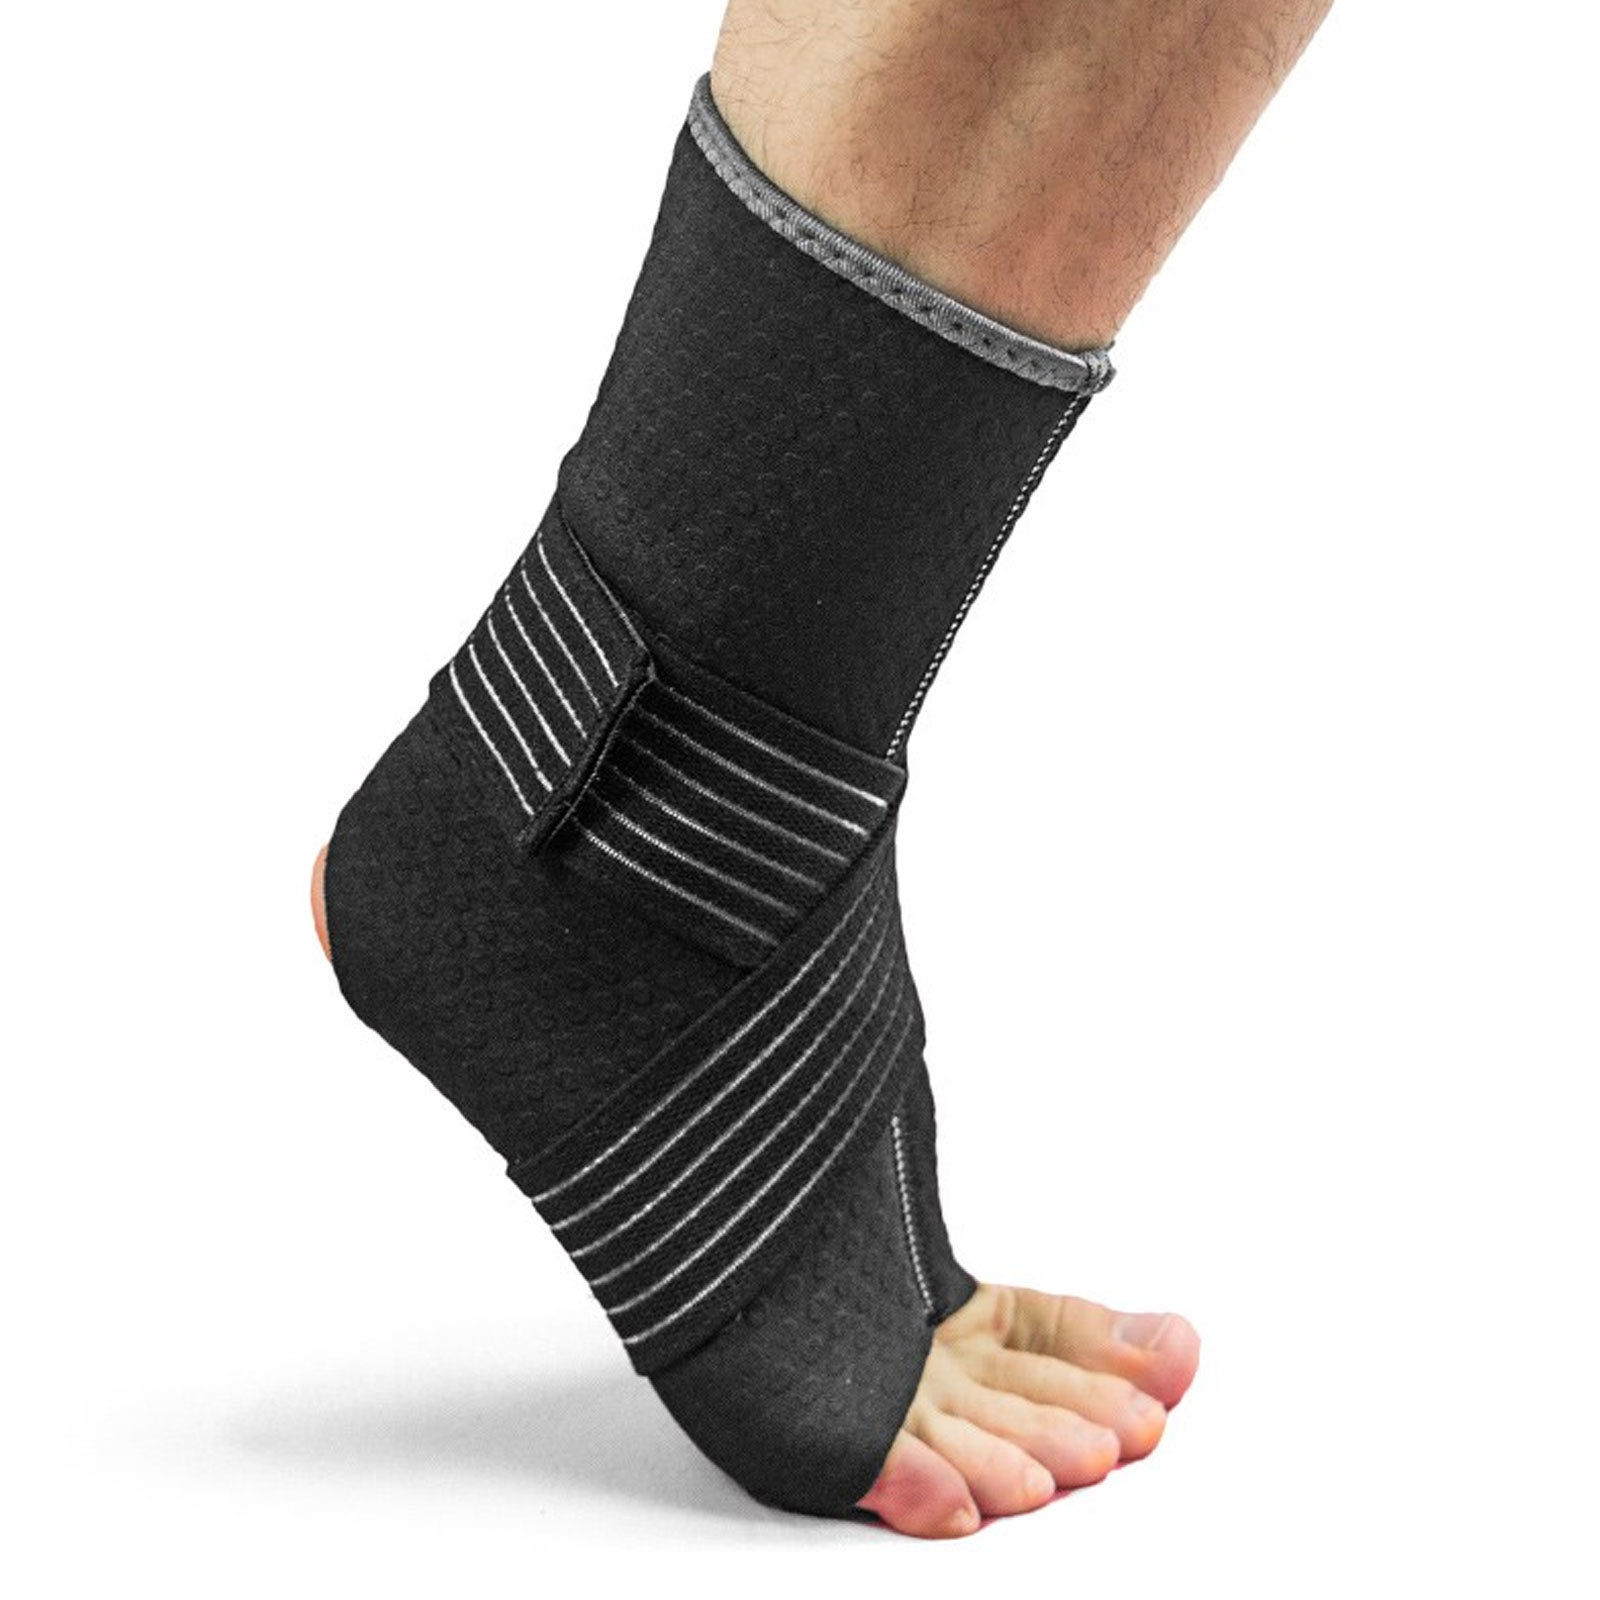 Buy > ankle support runners > in stock